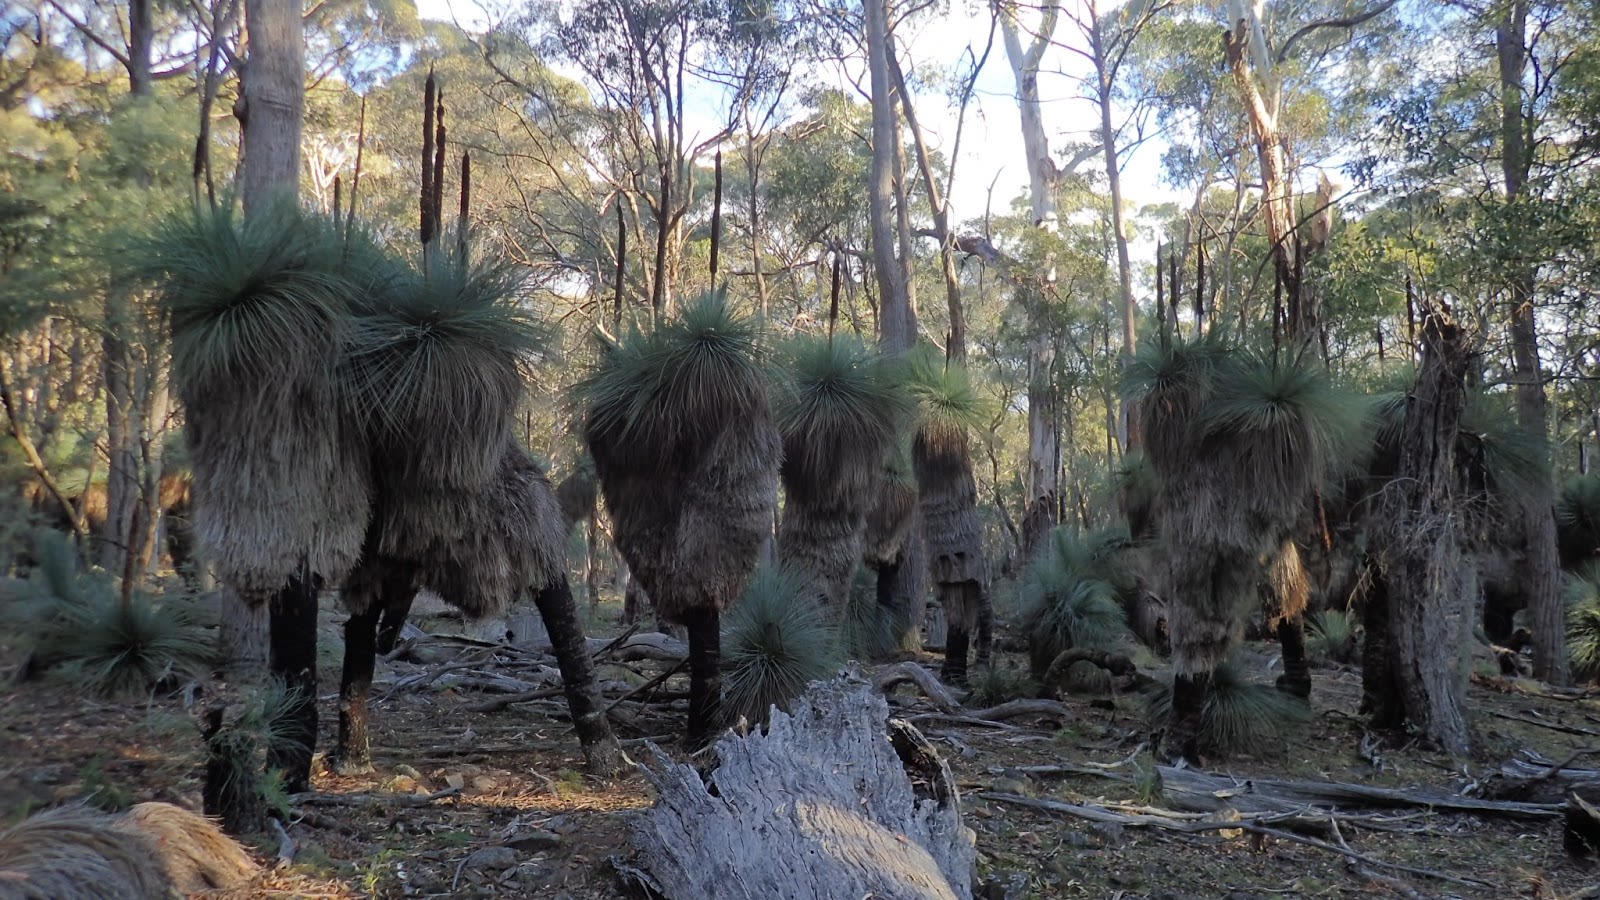 Grass trees, Coolah Tops National Park. Each one is more than four metres from ground to crown and potentially many hundreds of years old